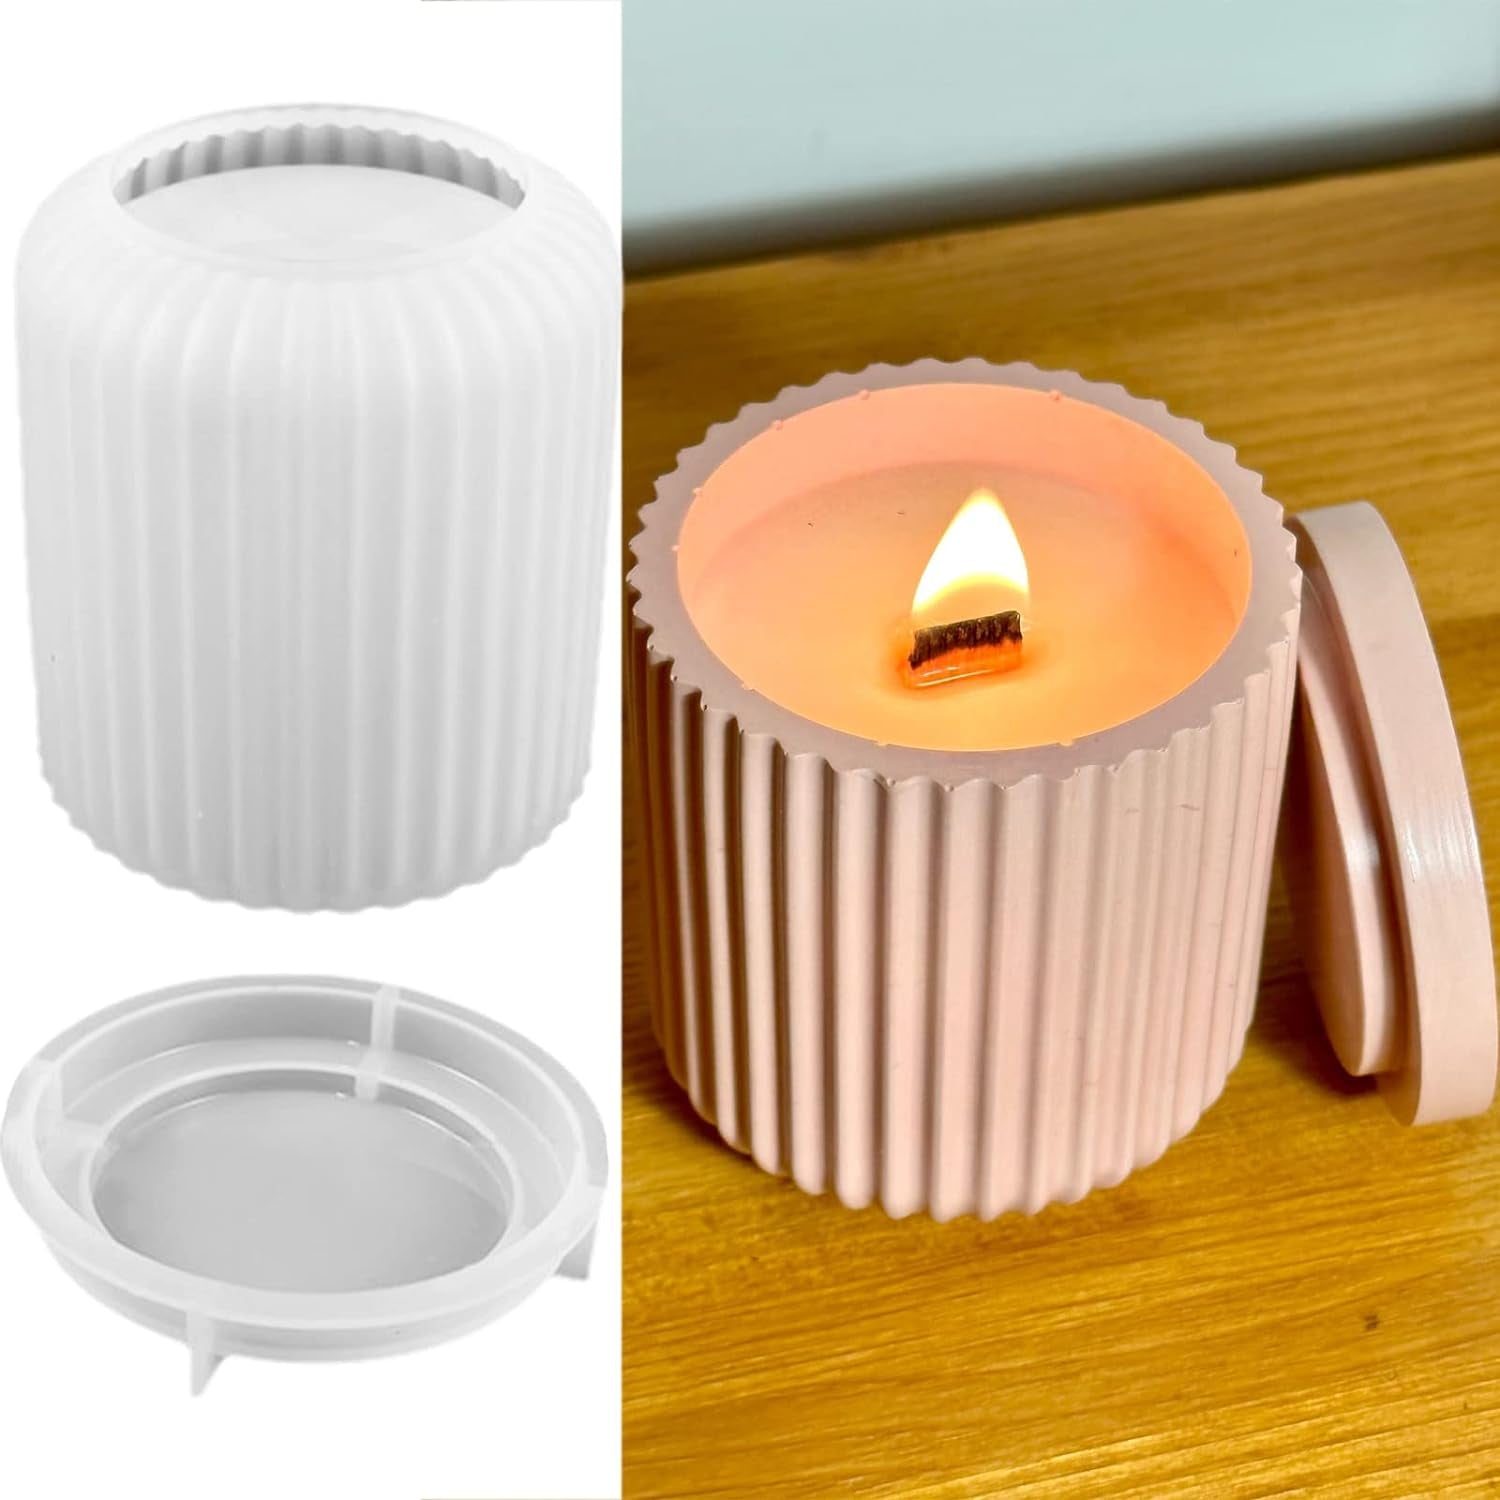 Storage Box with Lids Candle Jar Molds Set, Creative Silicone Candle Vessels Pot Molds, Concrete round Stripe with Cover Bottle Making Moulds for Storage Candle Holder (A)